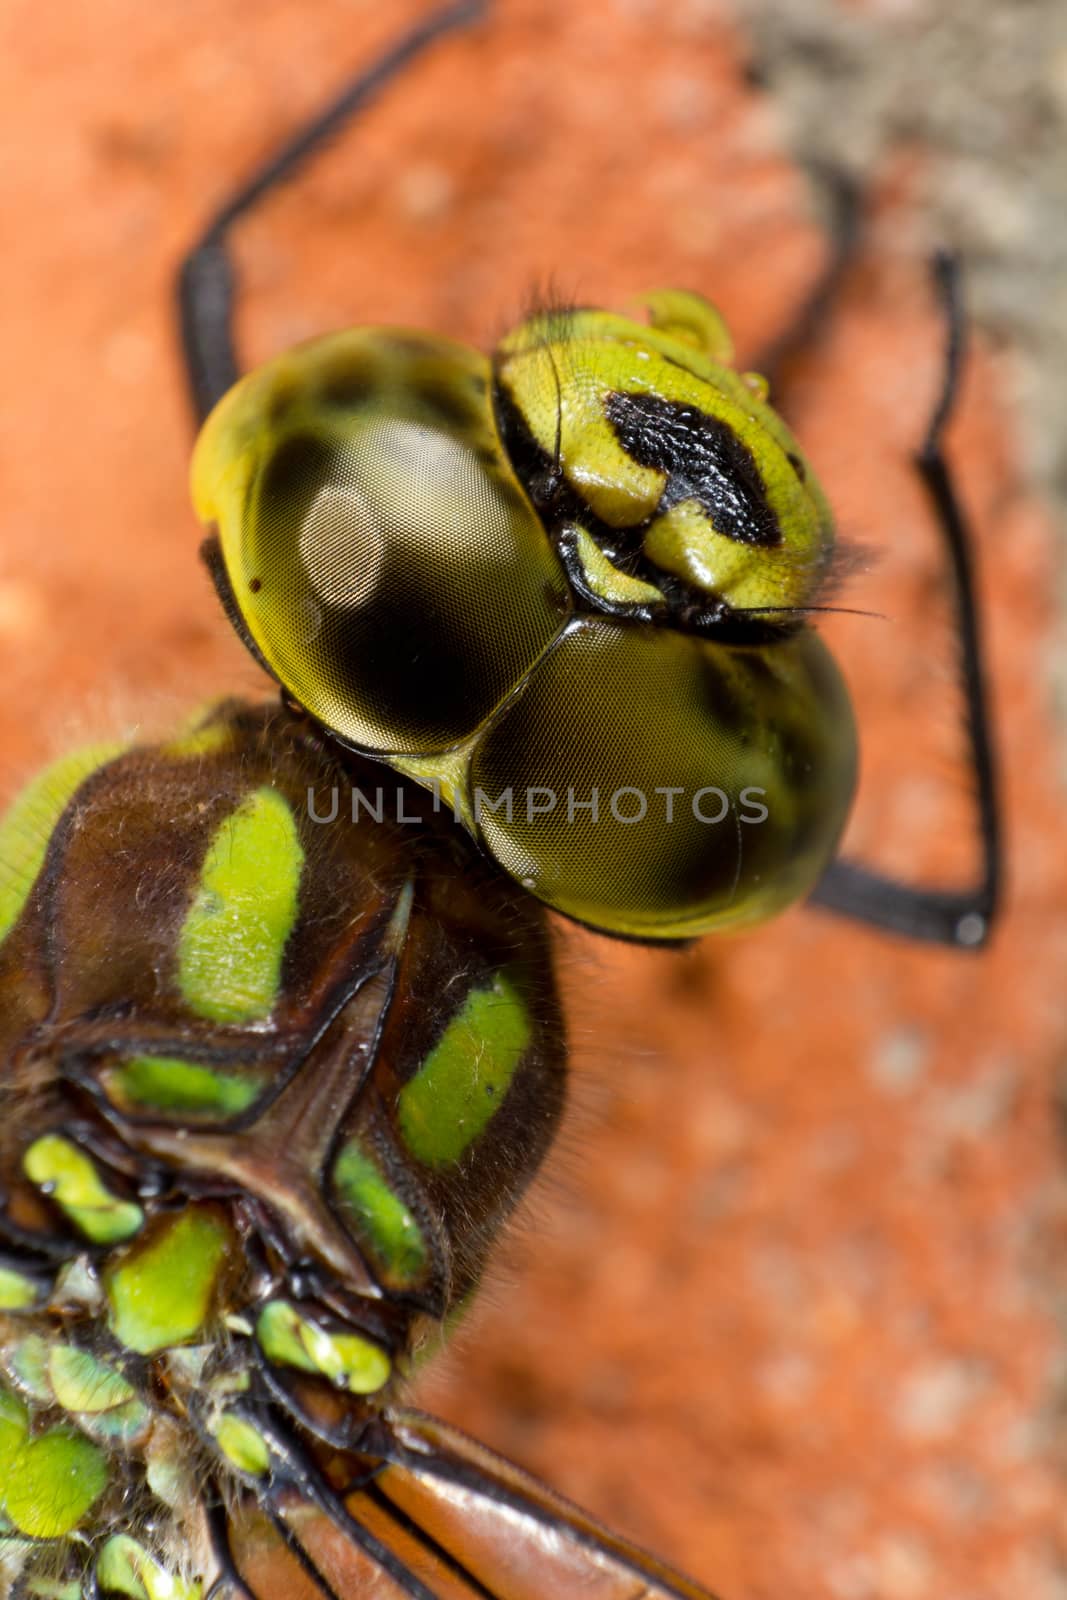 Green dragonfly in extreme closeup with facette eyes